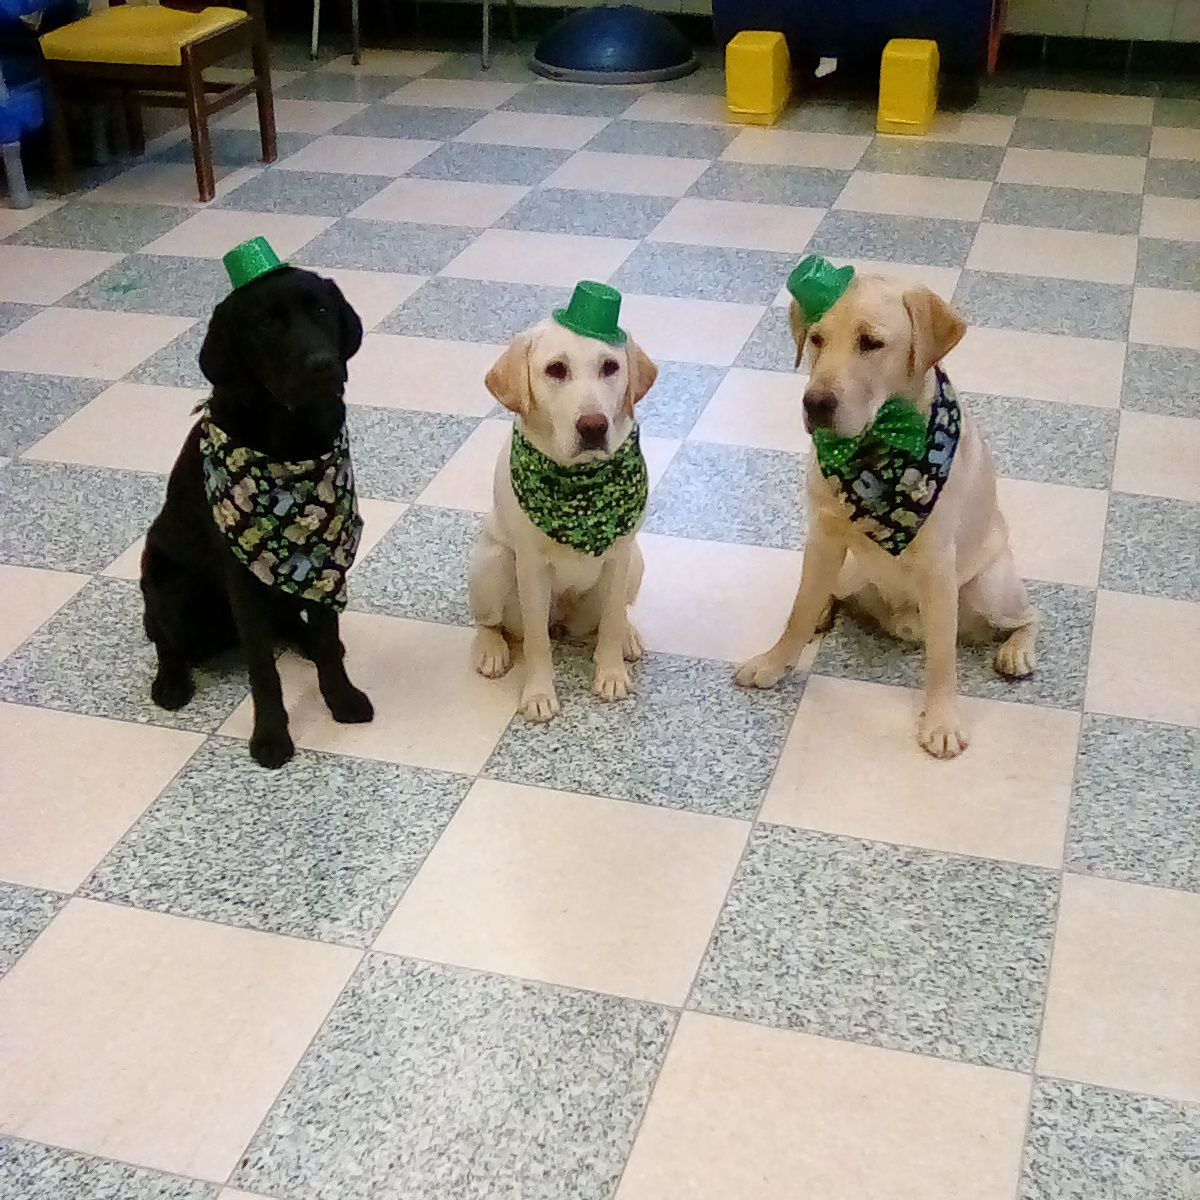 Three puppies sit while wearing St. Patrick's Day attire